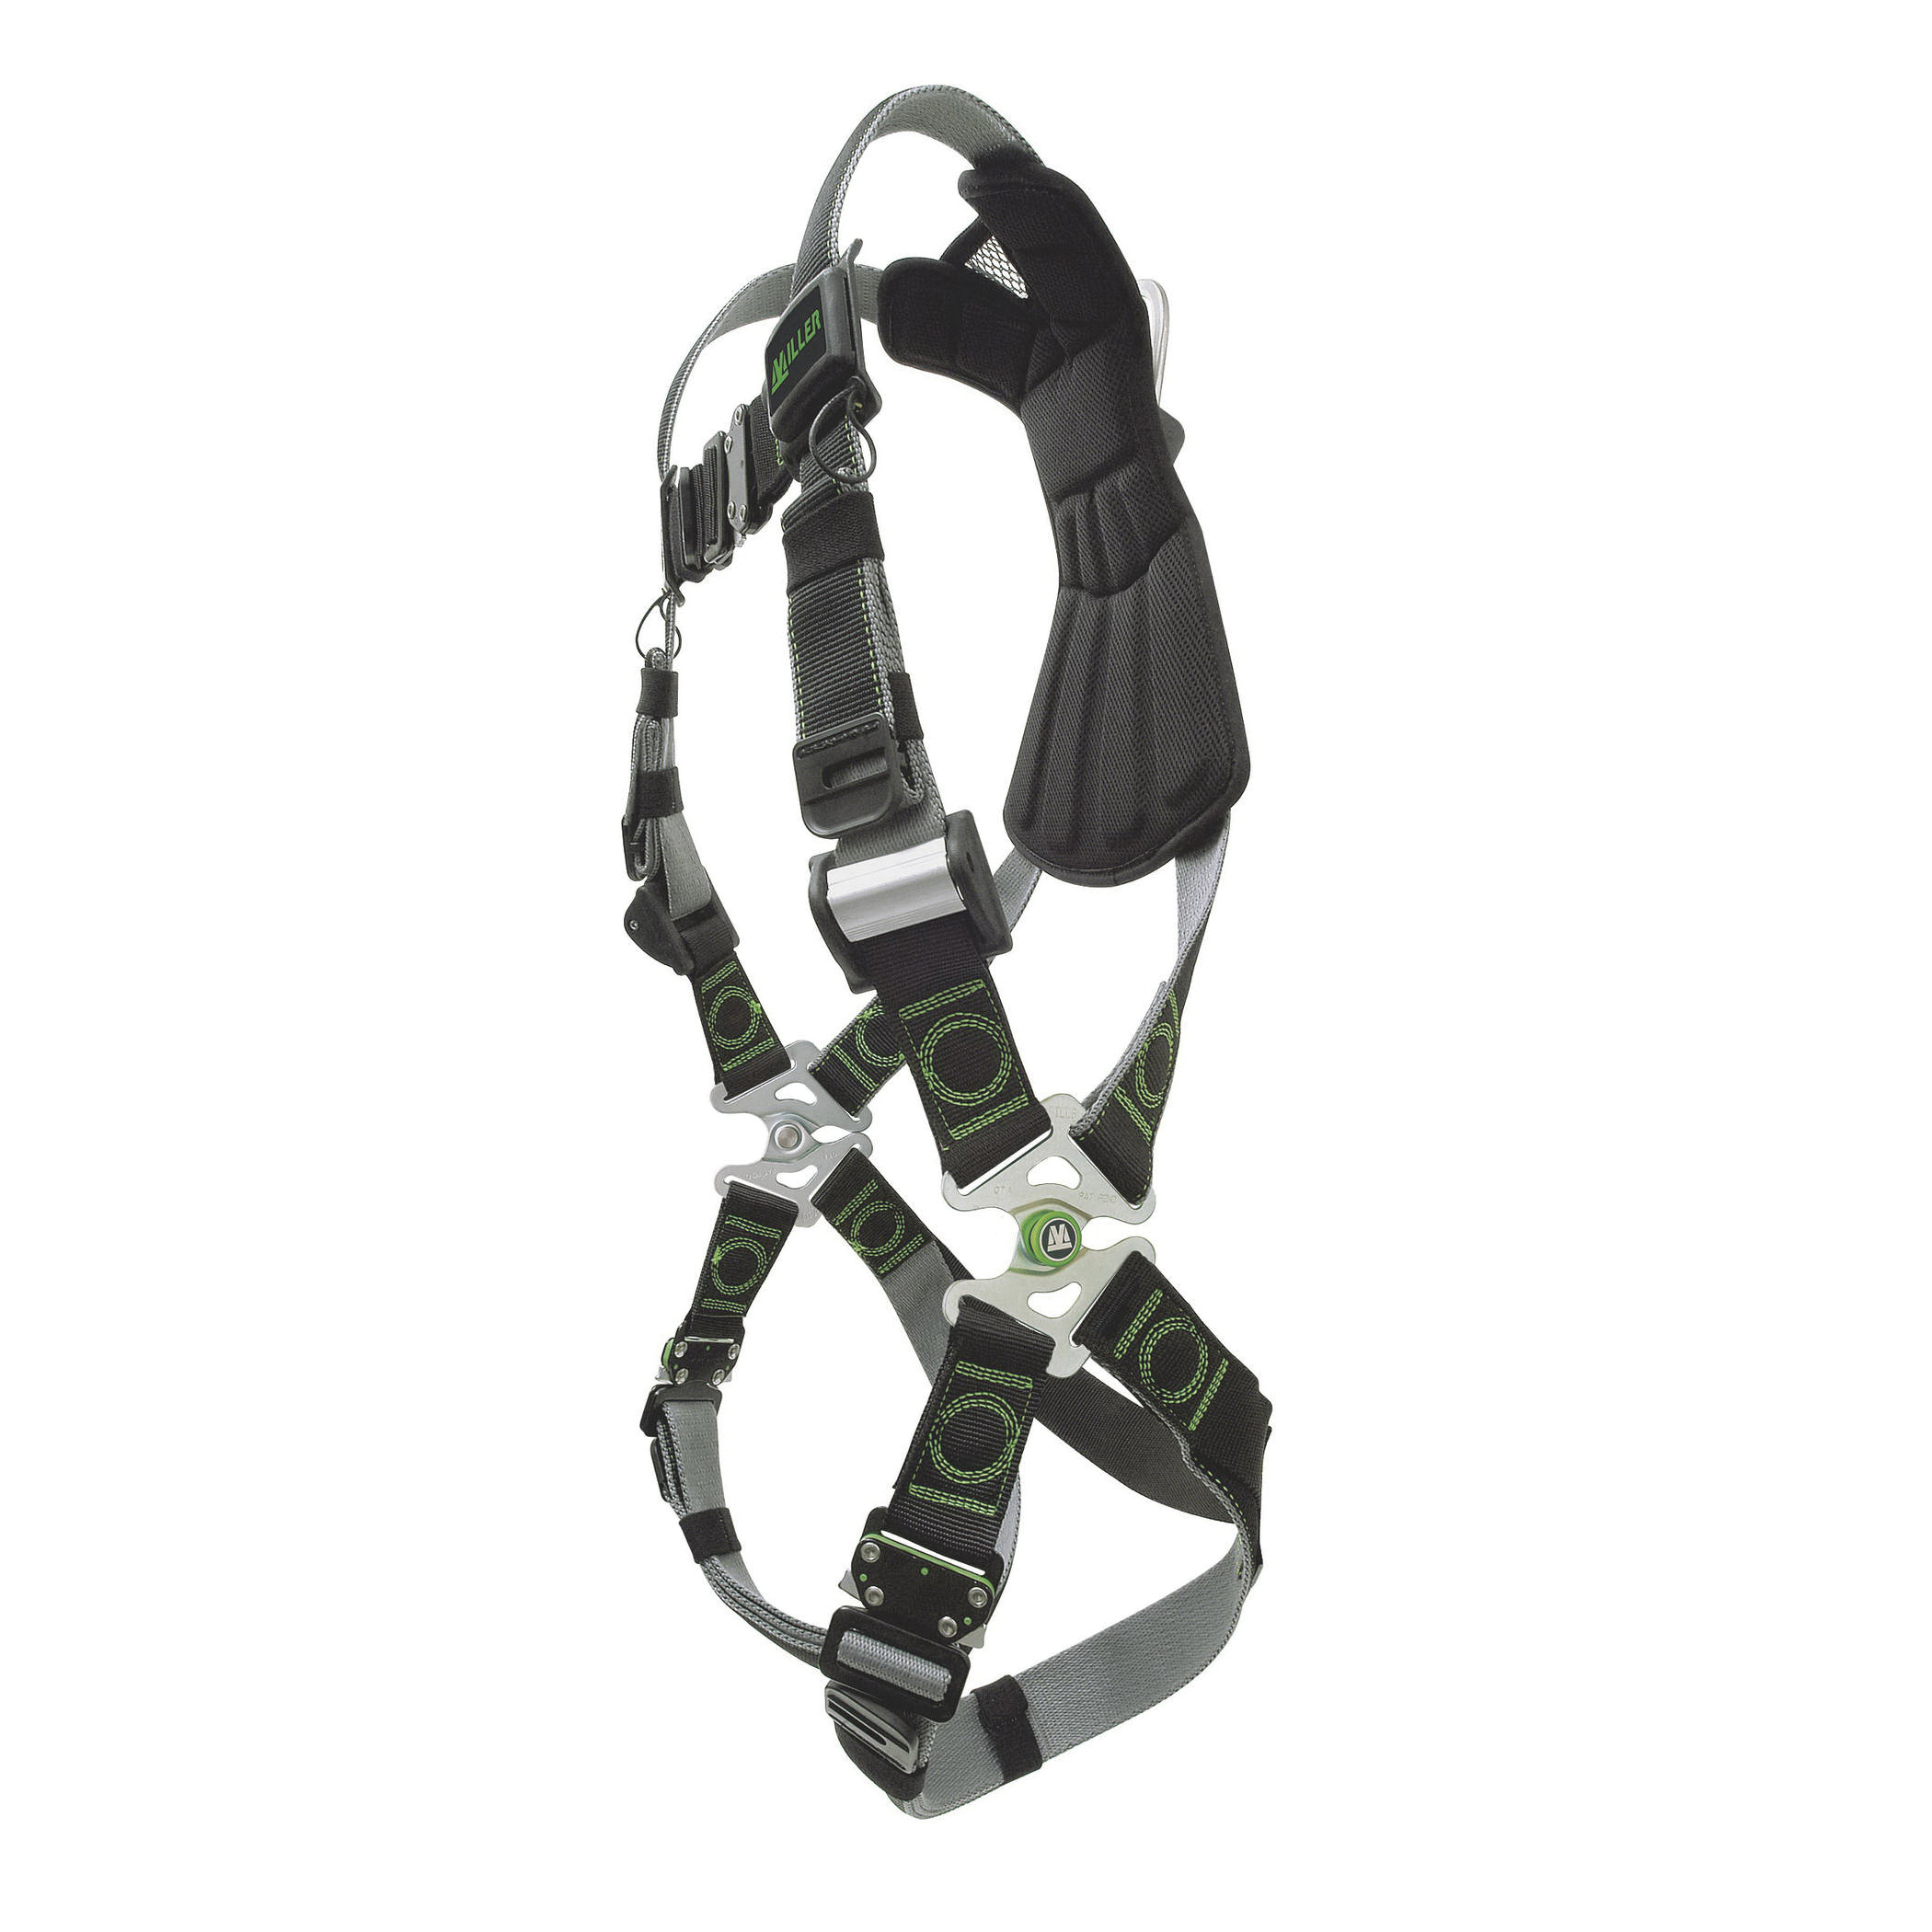 Miller® by Honeywell DuraFlex® E650-4/XXLGN Stretchable Harness, 2XL, 400 lb Load, Polyester/Urethane Elastomer Strap, Tongue Leg Strap Buckle, Mating Chest Strap Buckle, Friction Shoulder Strap Buckle, Steel Hardware, Green